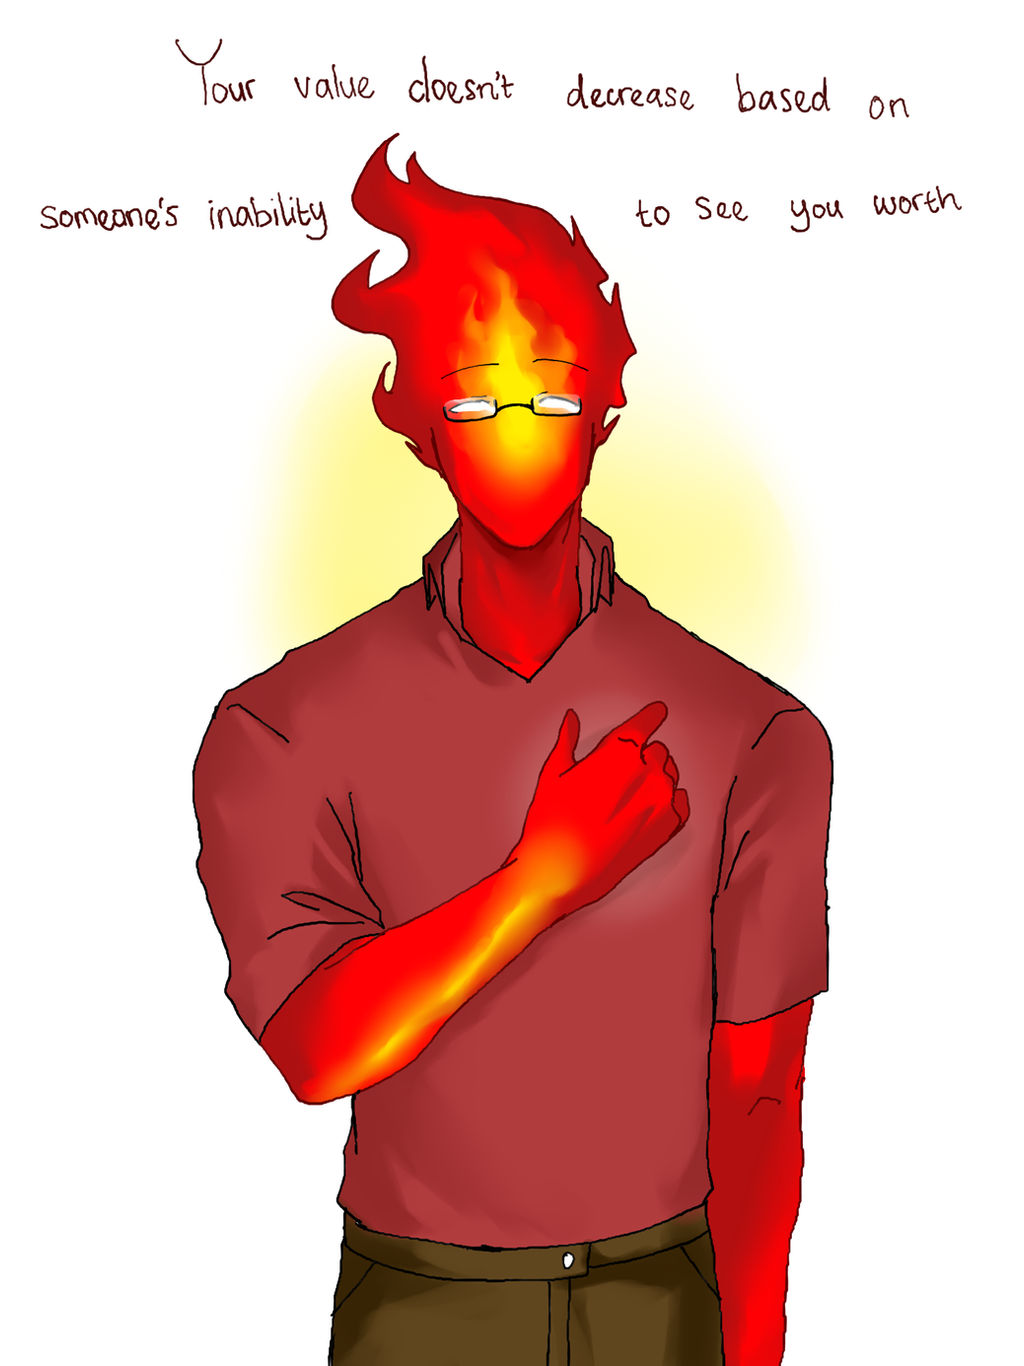 Grillby by Tris-Ghost on DeviantArt